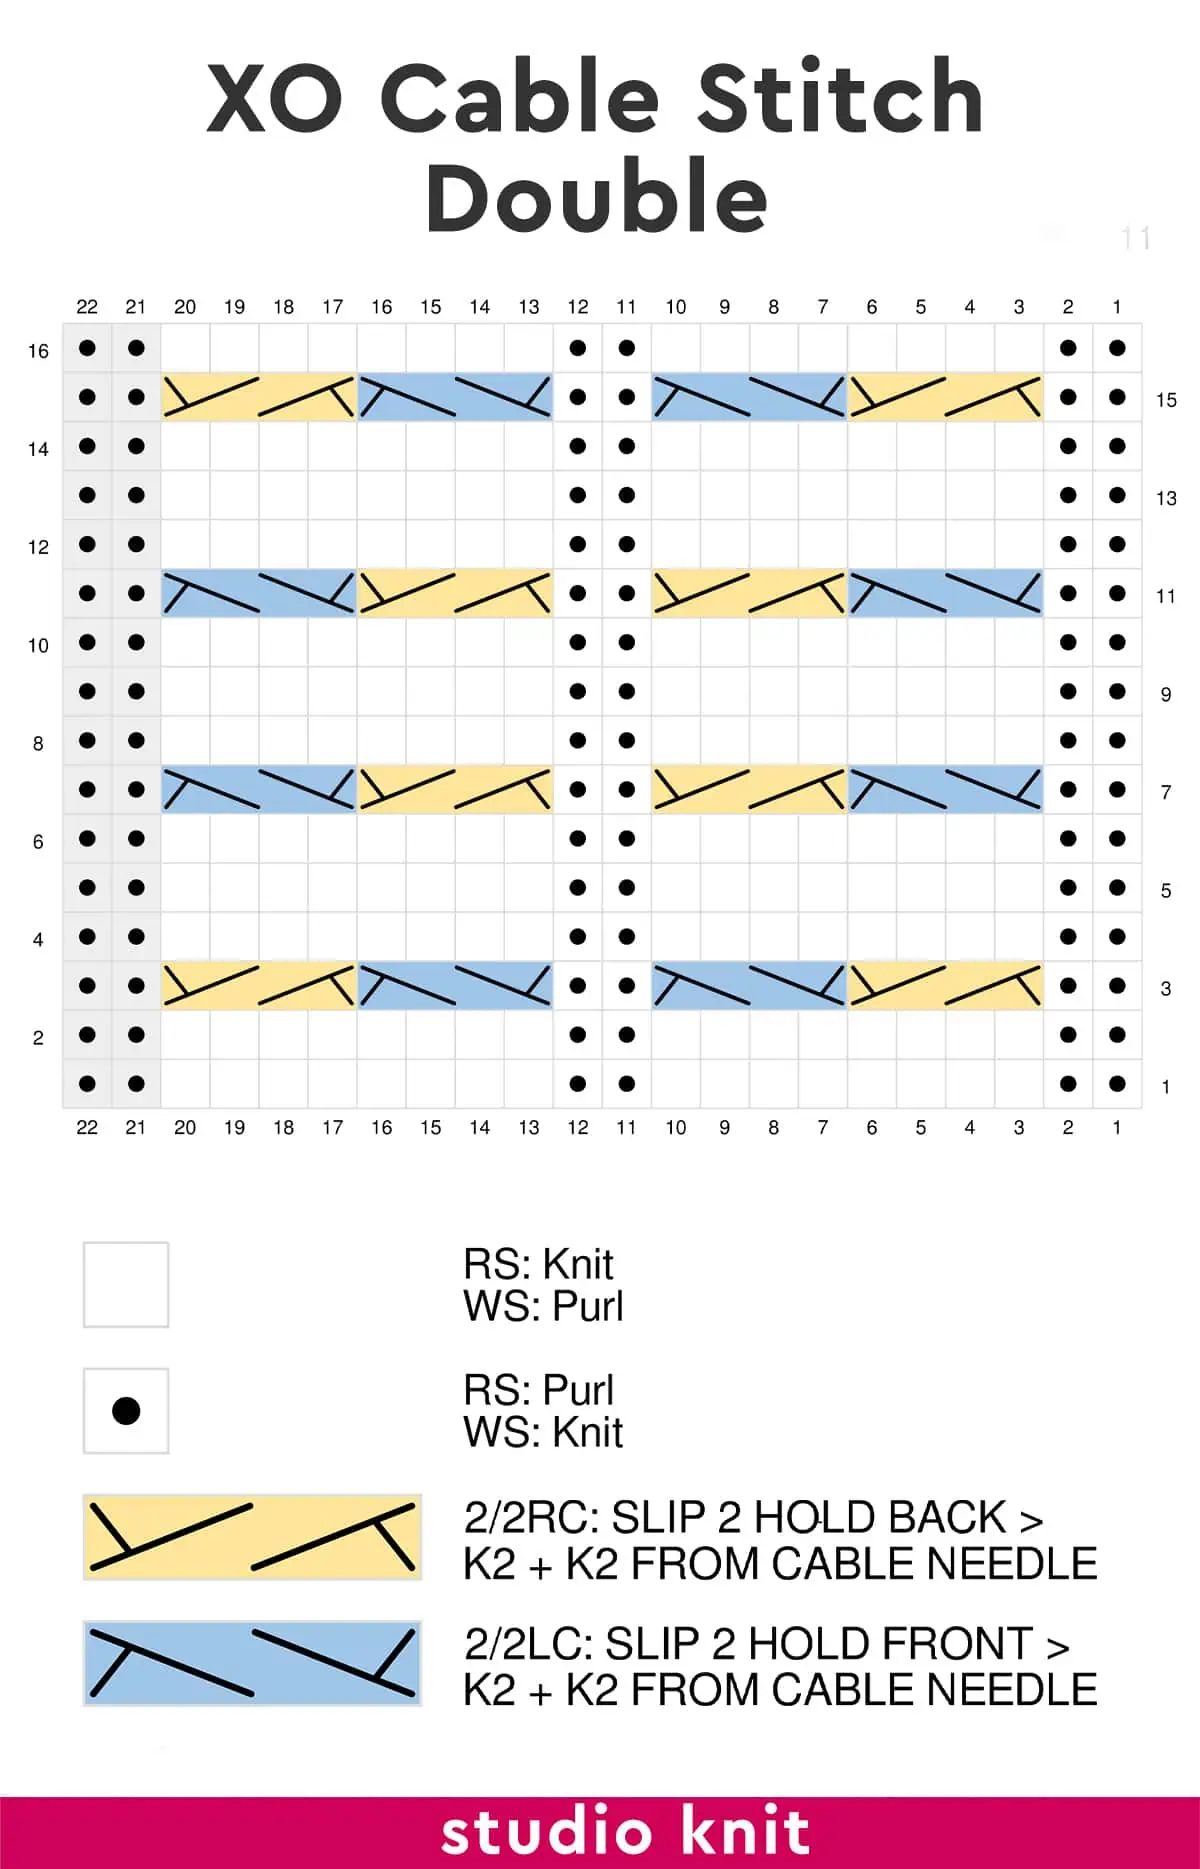 XO Cable Stitch Double rows knitting chart by Studio Knit.